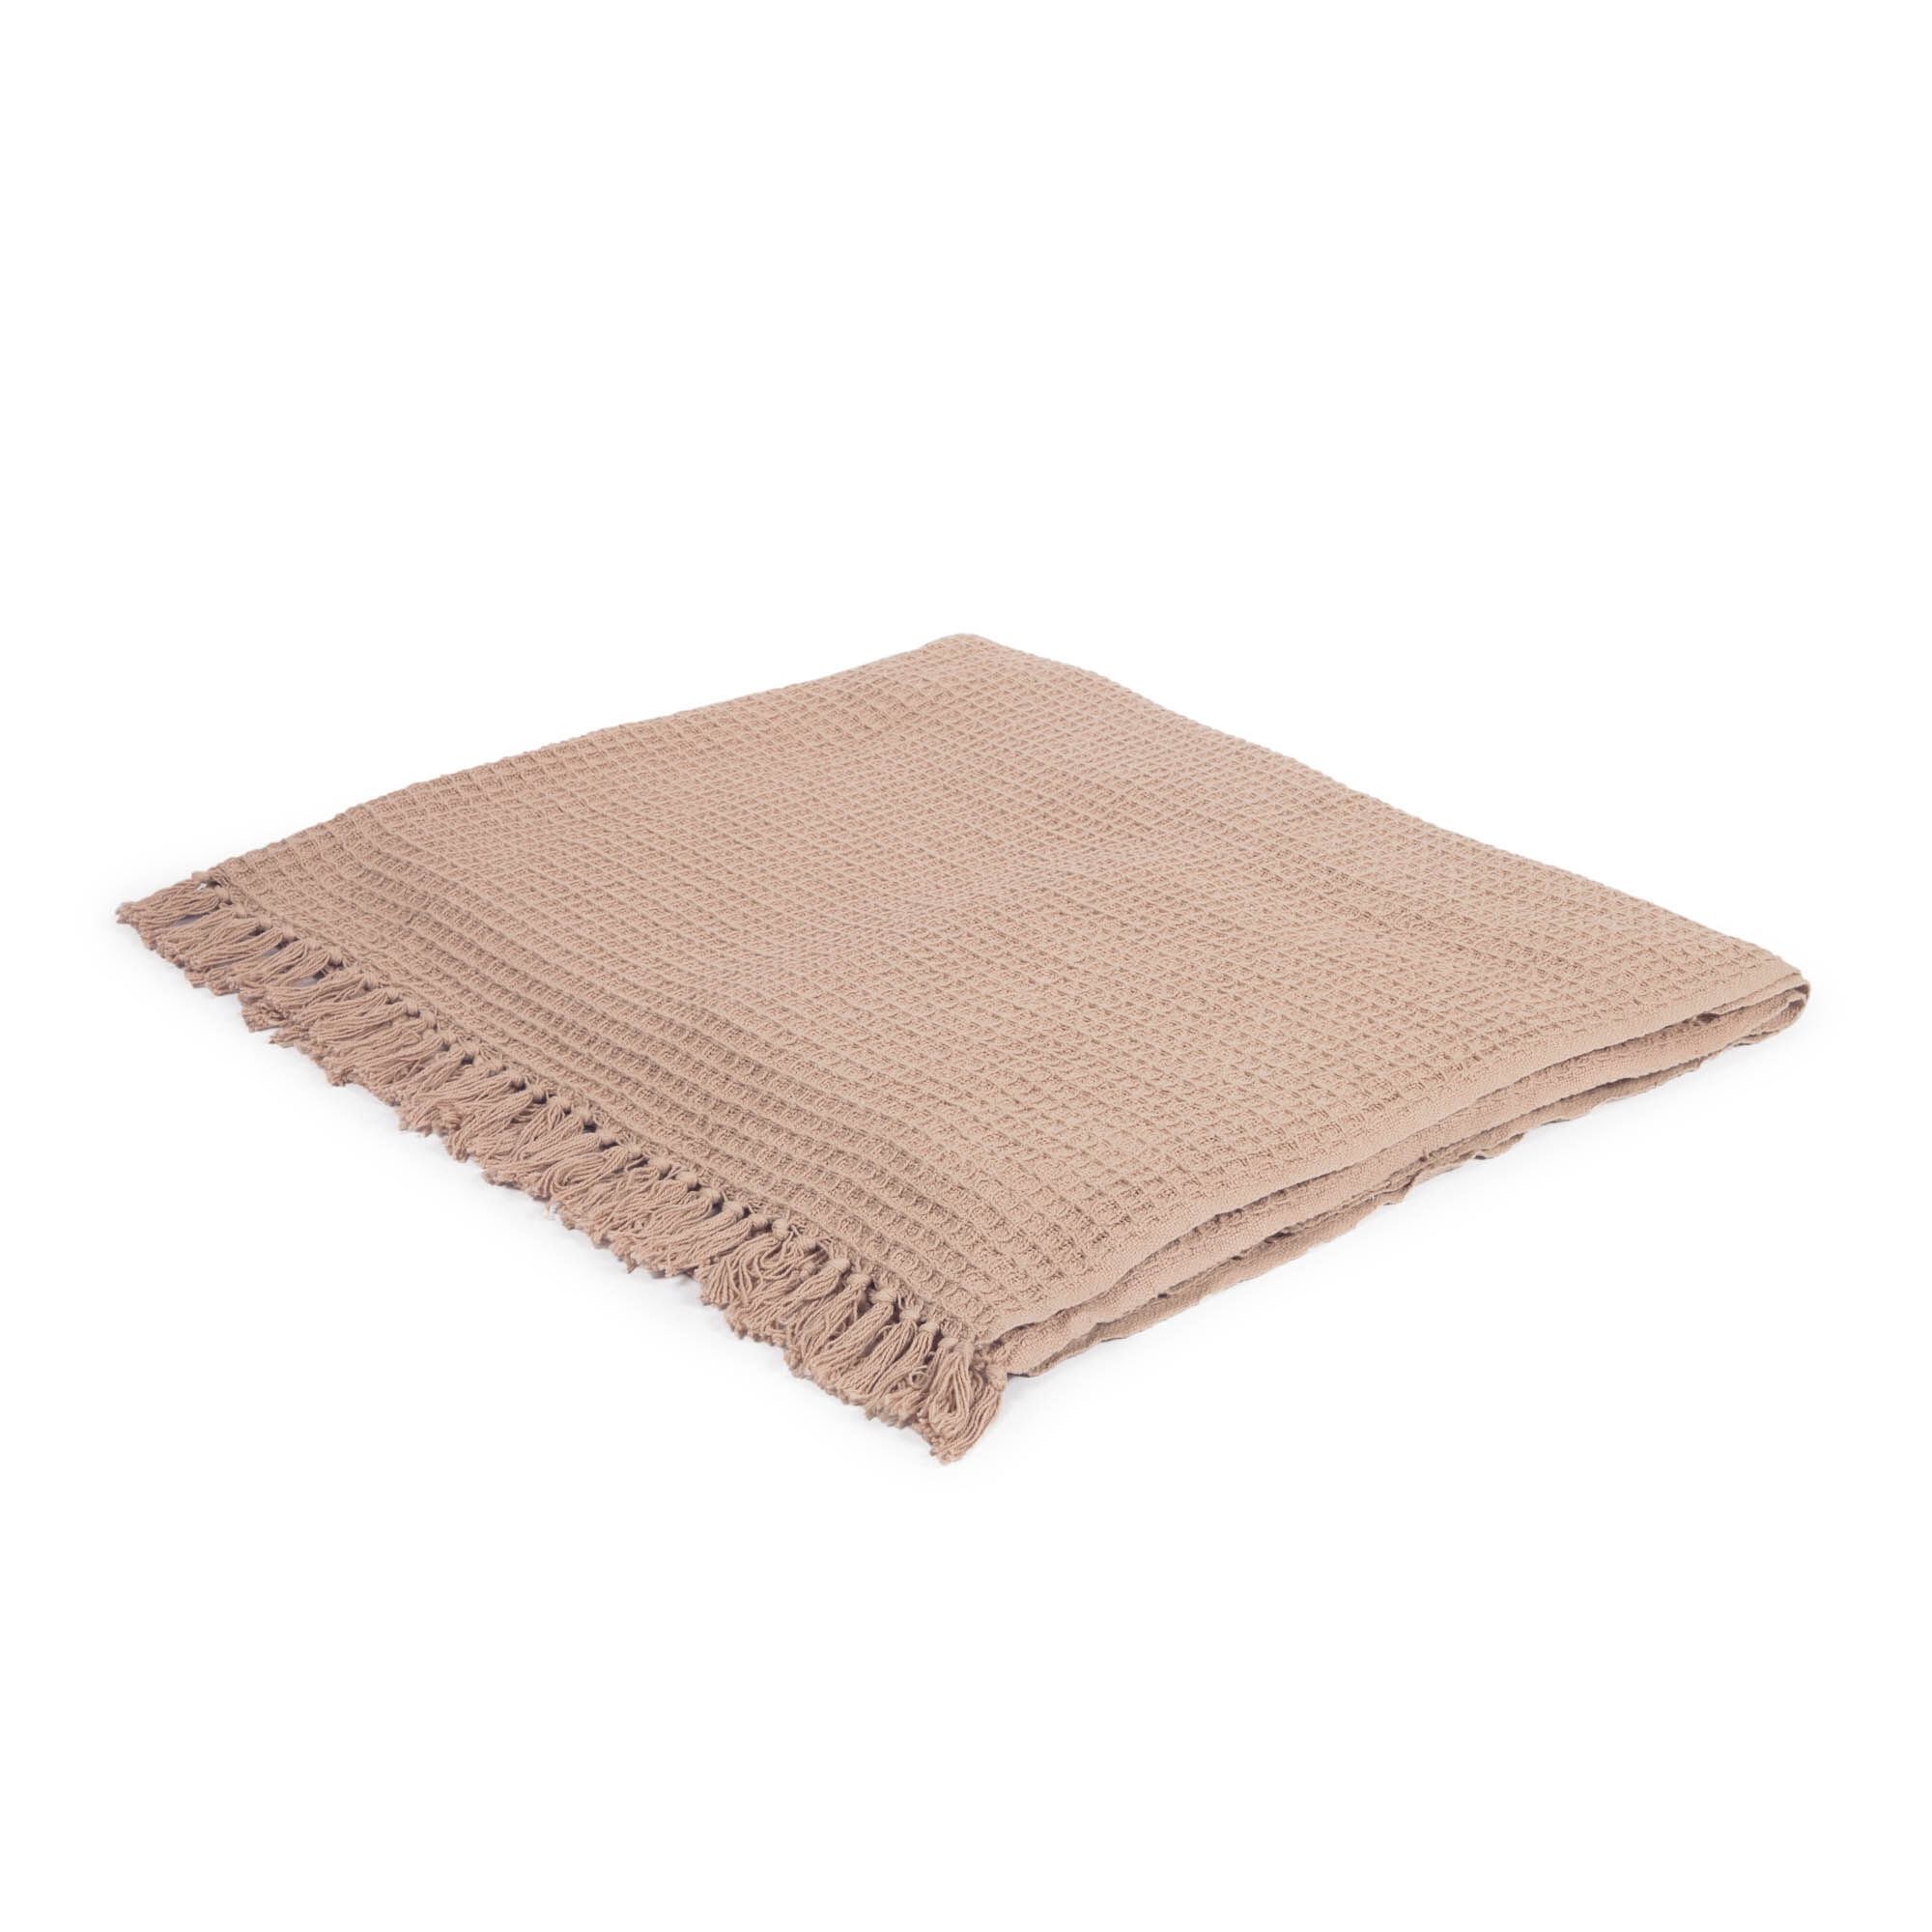 Kave Home Shallowy 100% cotton blanket in light pink 130 x 170 cm